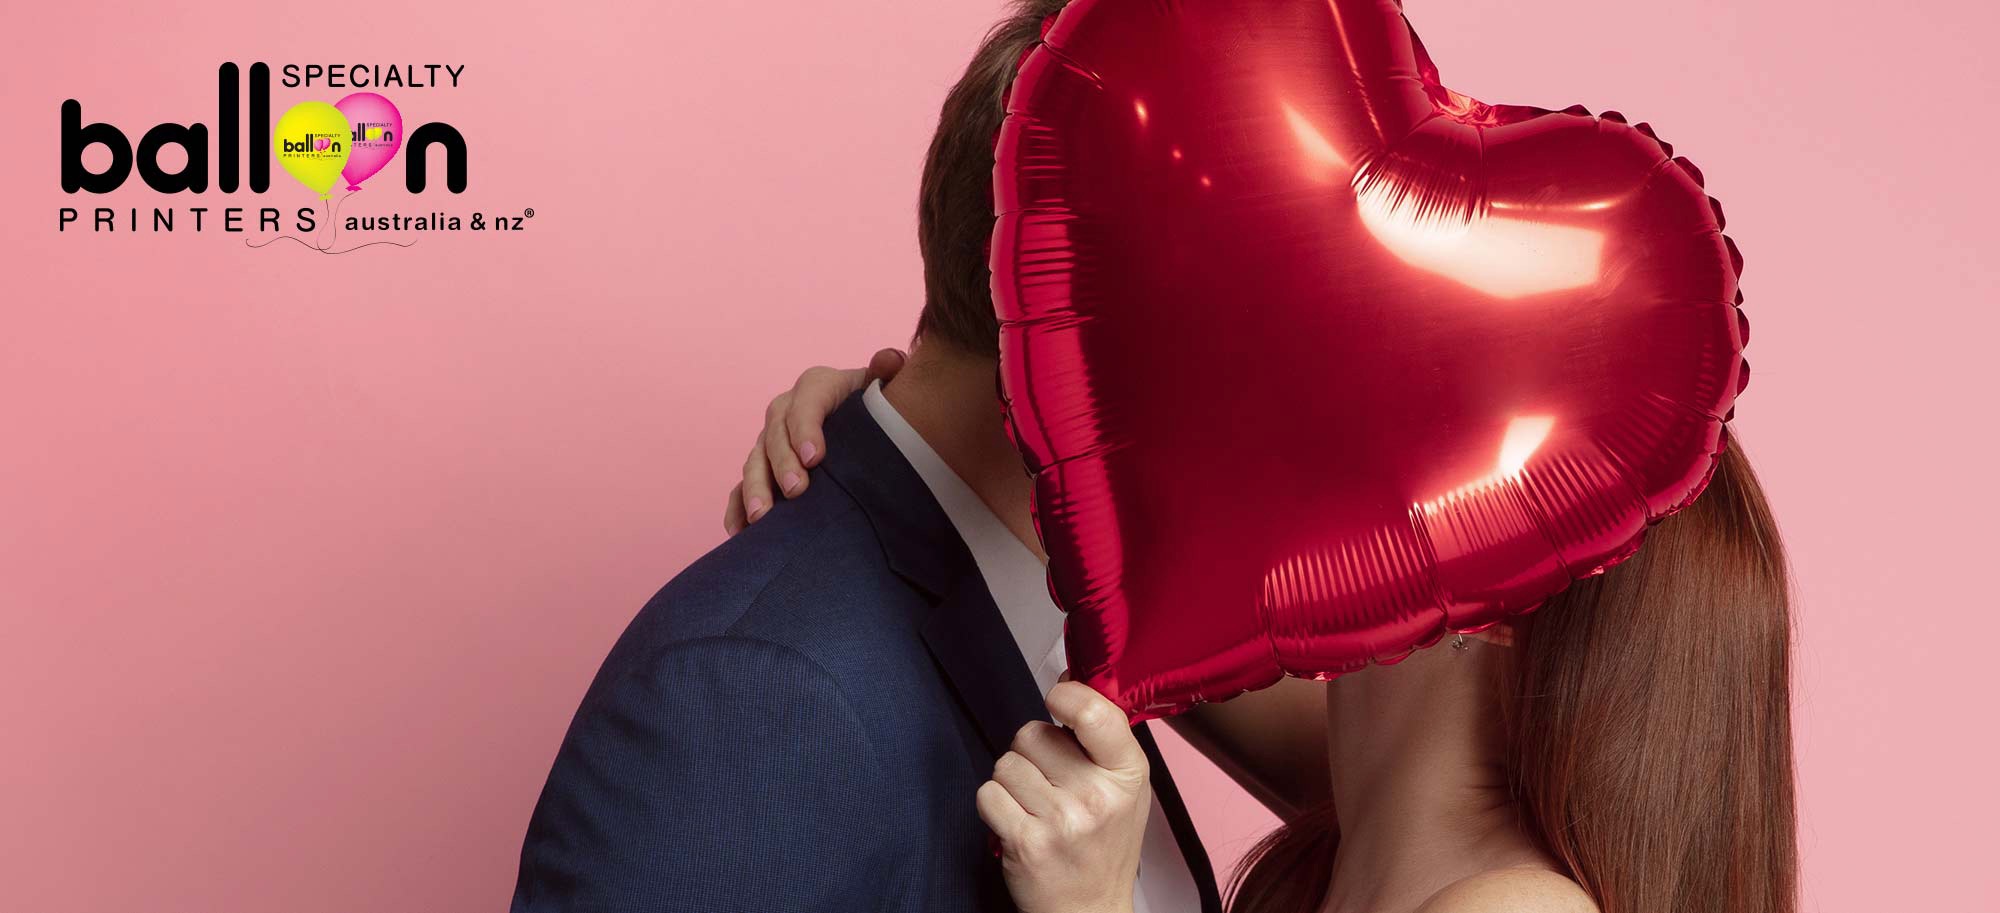 Specialty Balloon Printers Valentine’s Day Gift Ideas For Every Budget